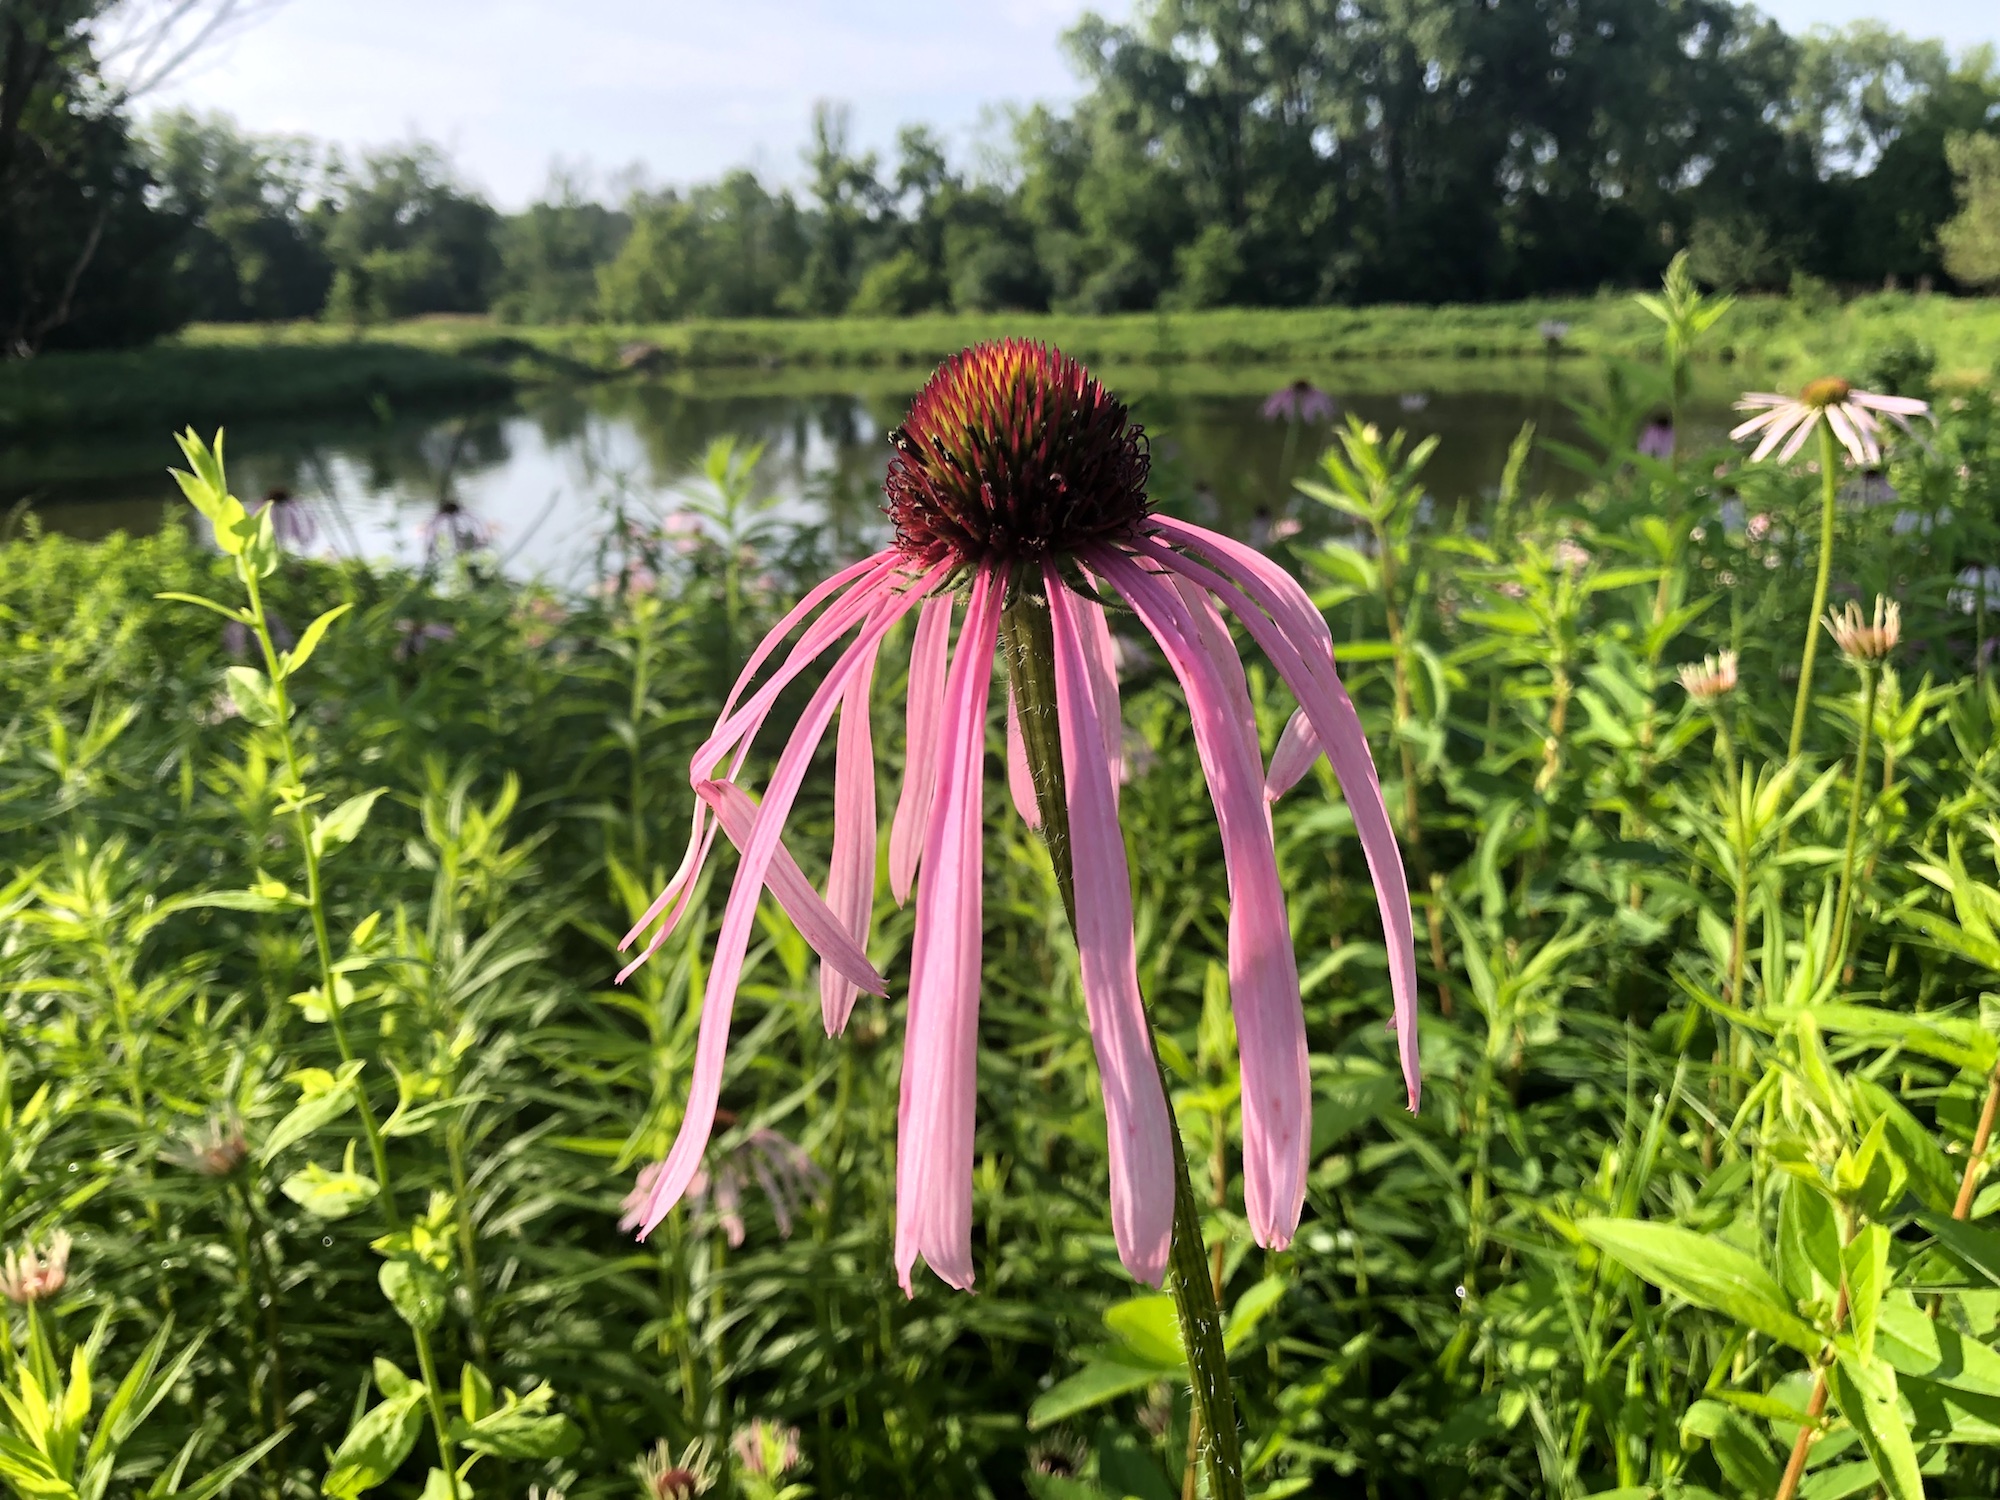 Pale purple coneflower on bank of Retaining Pond on corner of Nakoma Road and Manitou Way on May June 29, 2019.